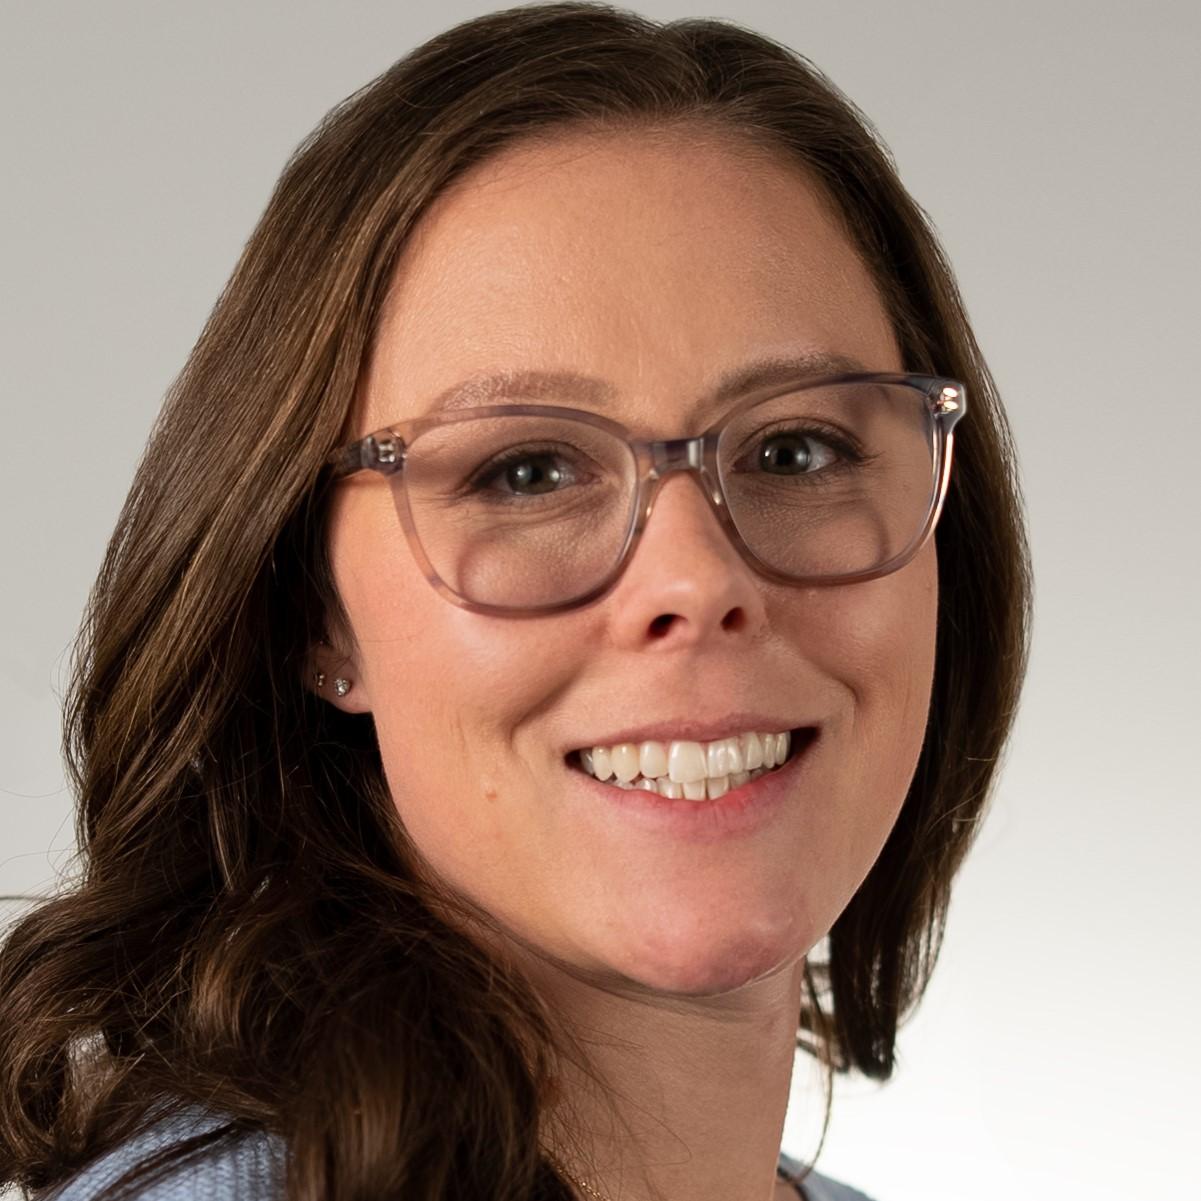 Courtney Phillips headshot: woman with long brown hair and glasses.